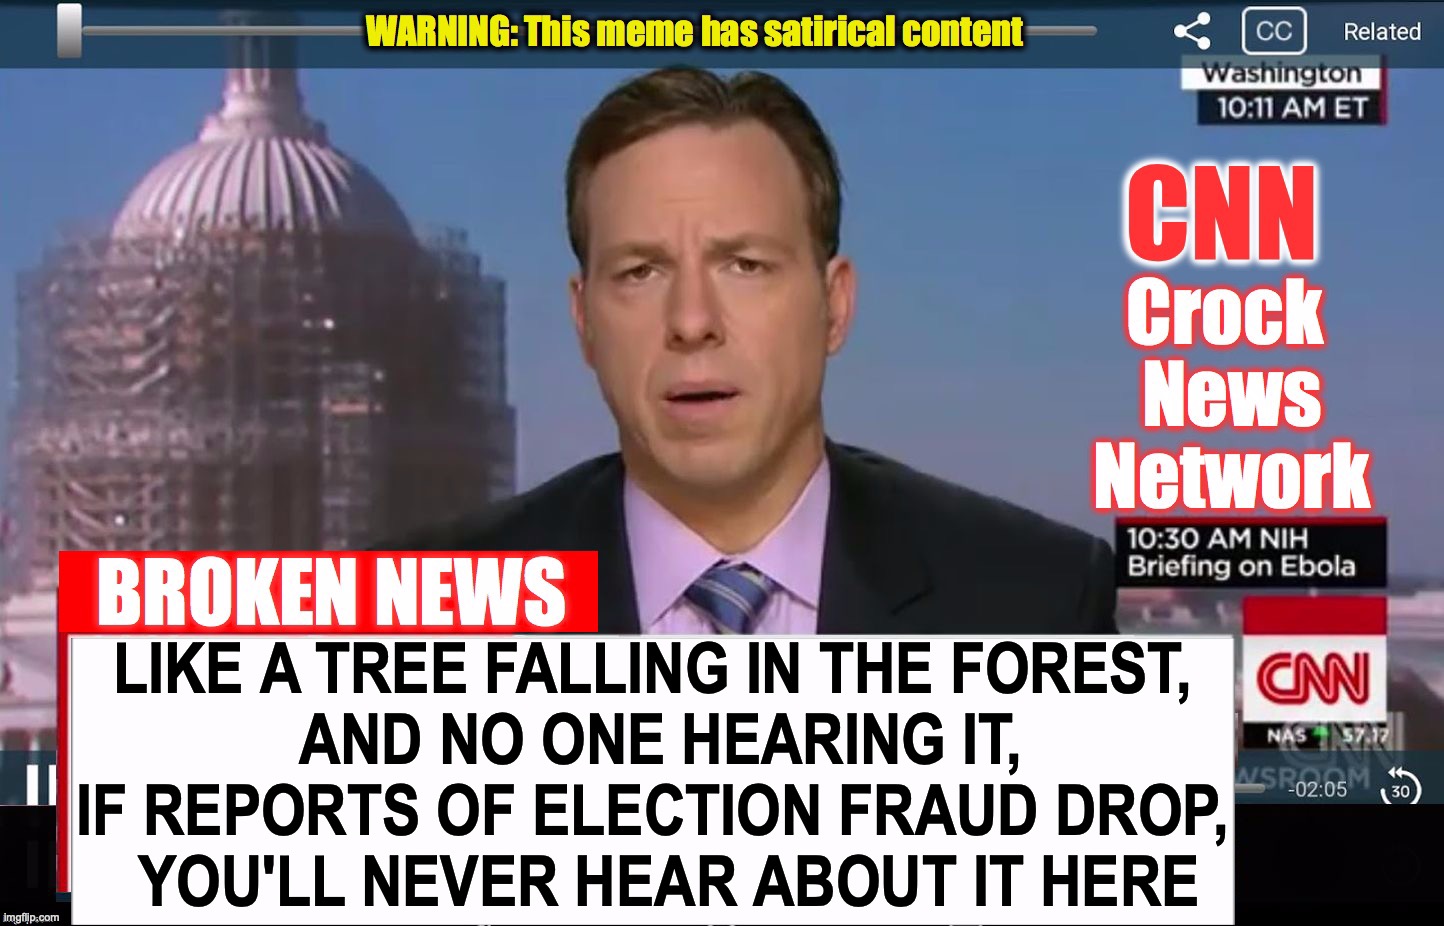 CNN Broken News  | LIKE A TREE FALLING IN THE FOREST,
 AND NO ONE HEARING IT, IF REPORTS OF ELECTION FRAUD DROP,
  YOU'LL NEVER HEAR ABOUT IT HERE | image tagged in cnn broken news,election fraud | made w/ Imgflip meme maker